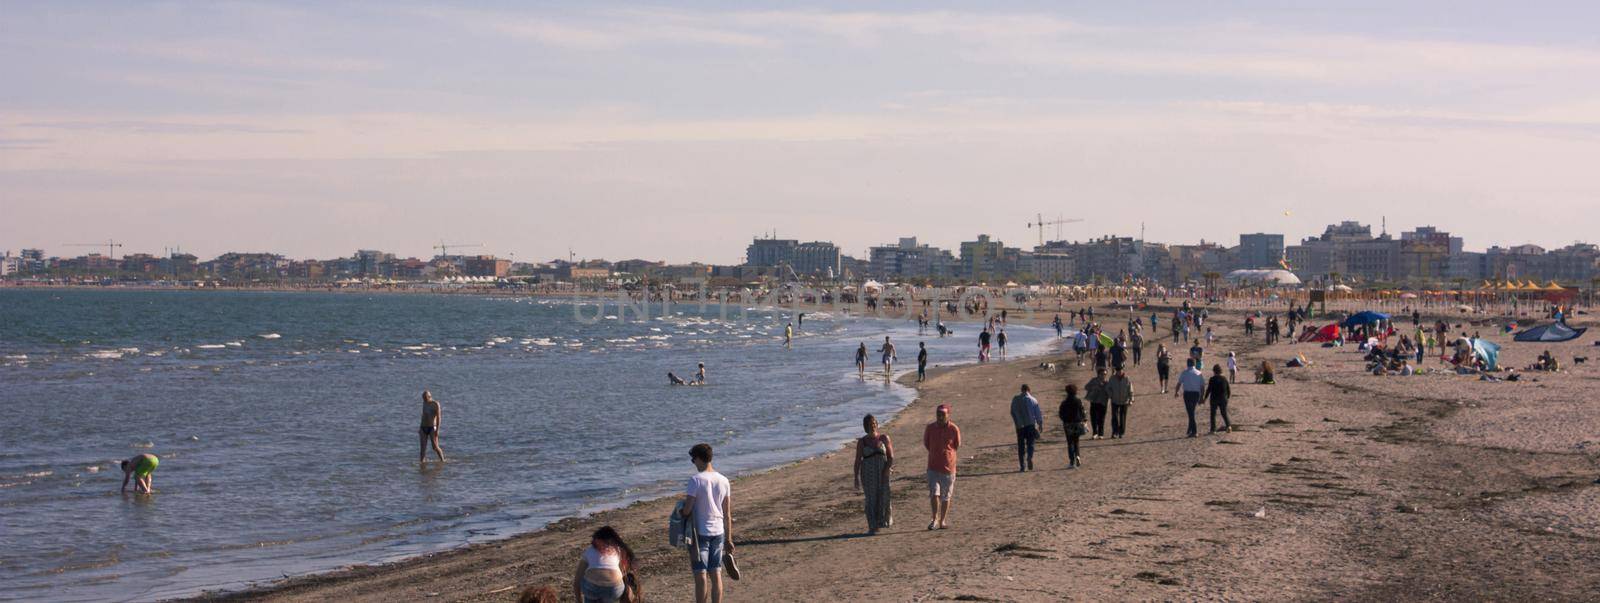 Beach with people, banner image with copy space